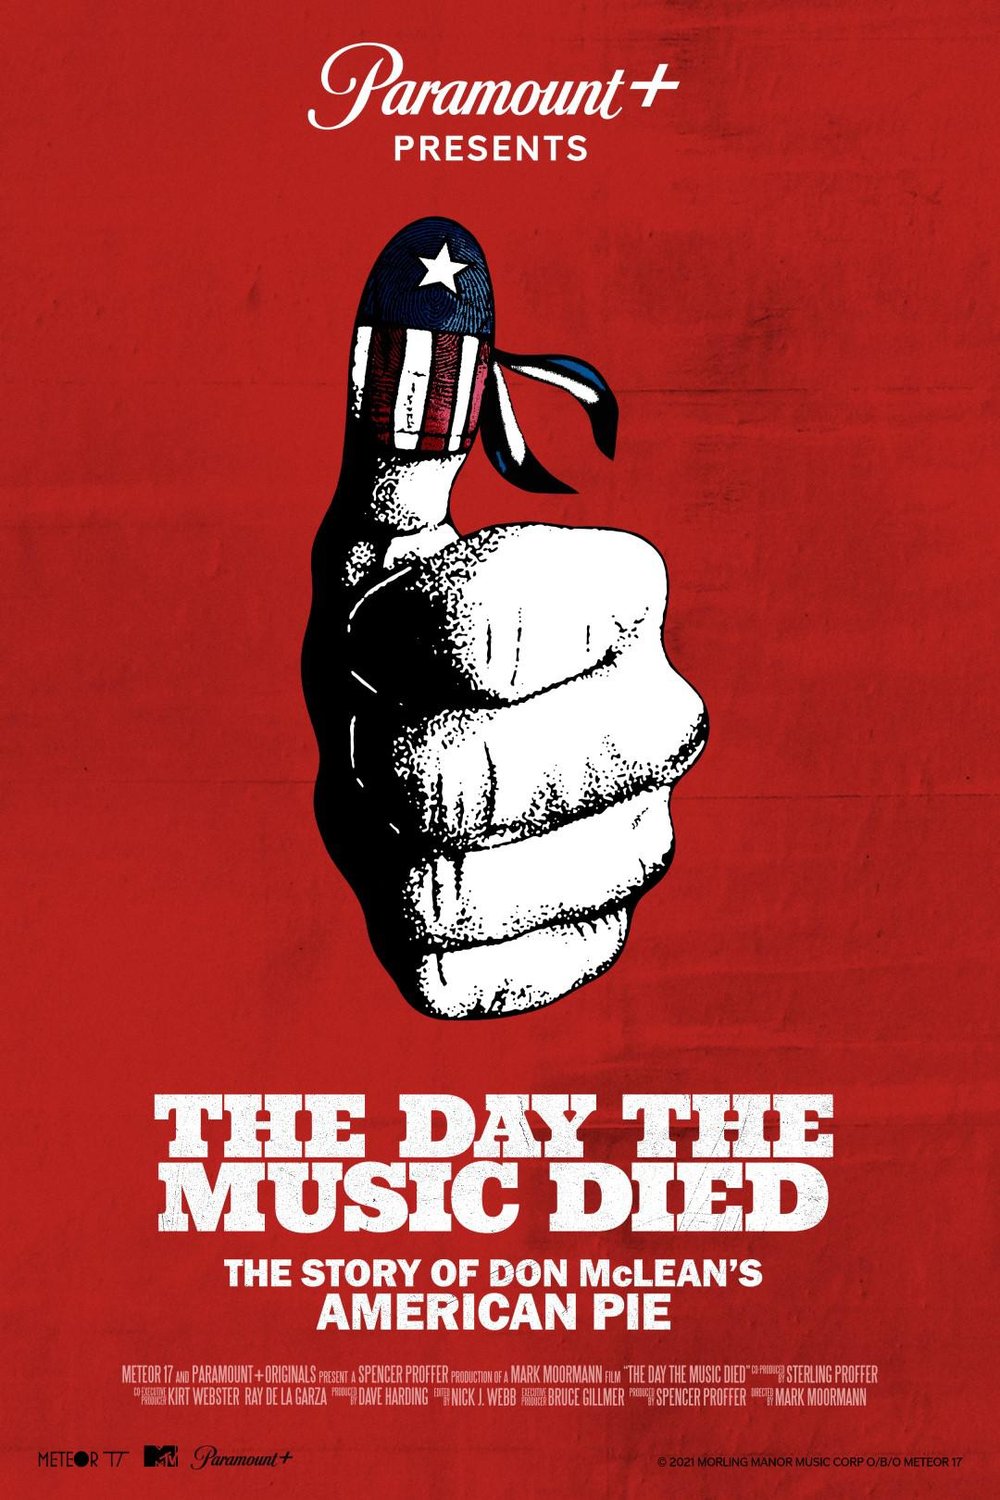 Poster of the movie The Day the Music Died/American Pie